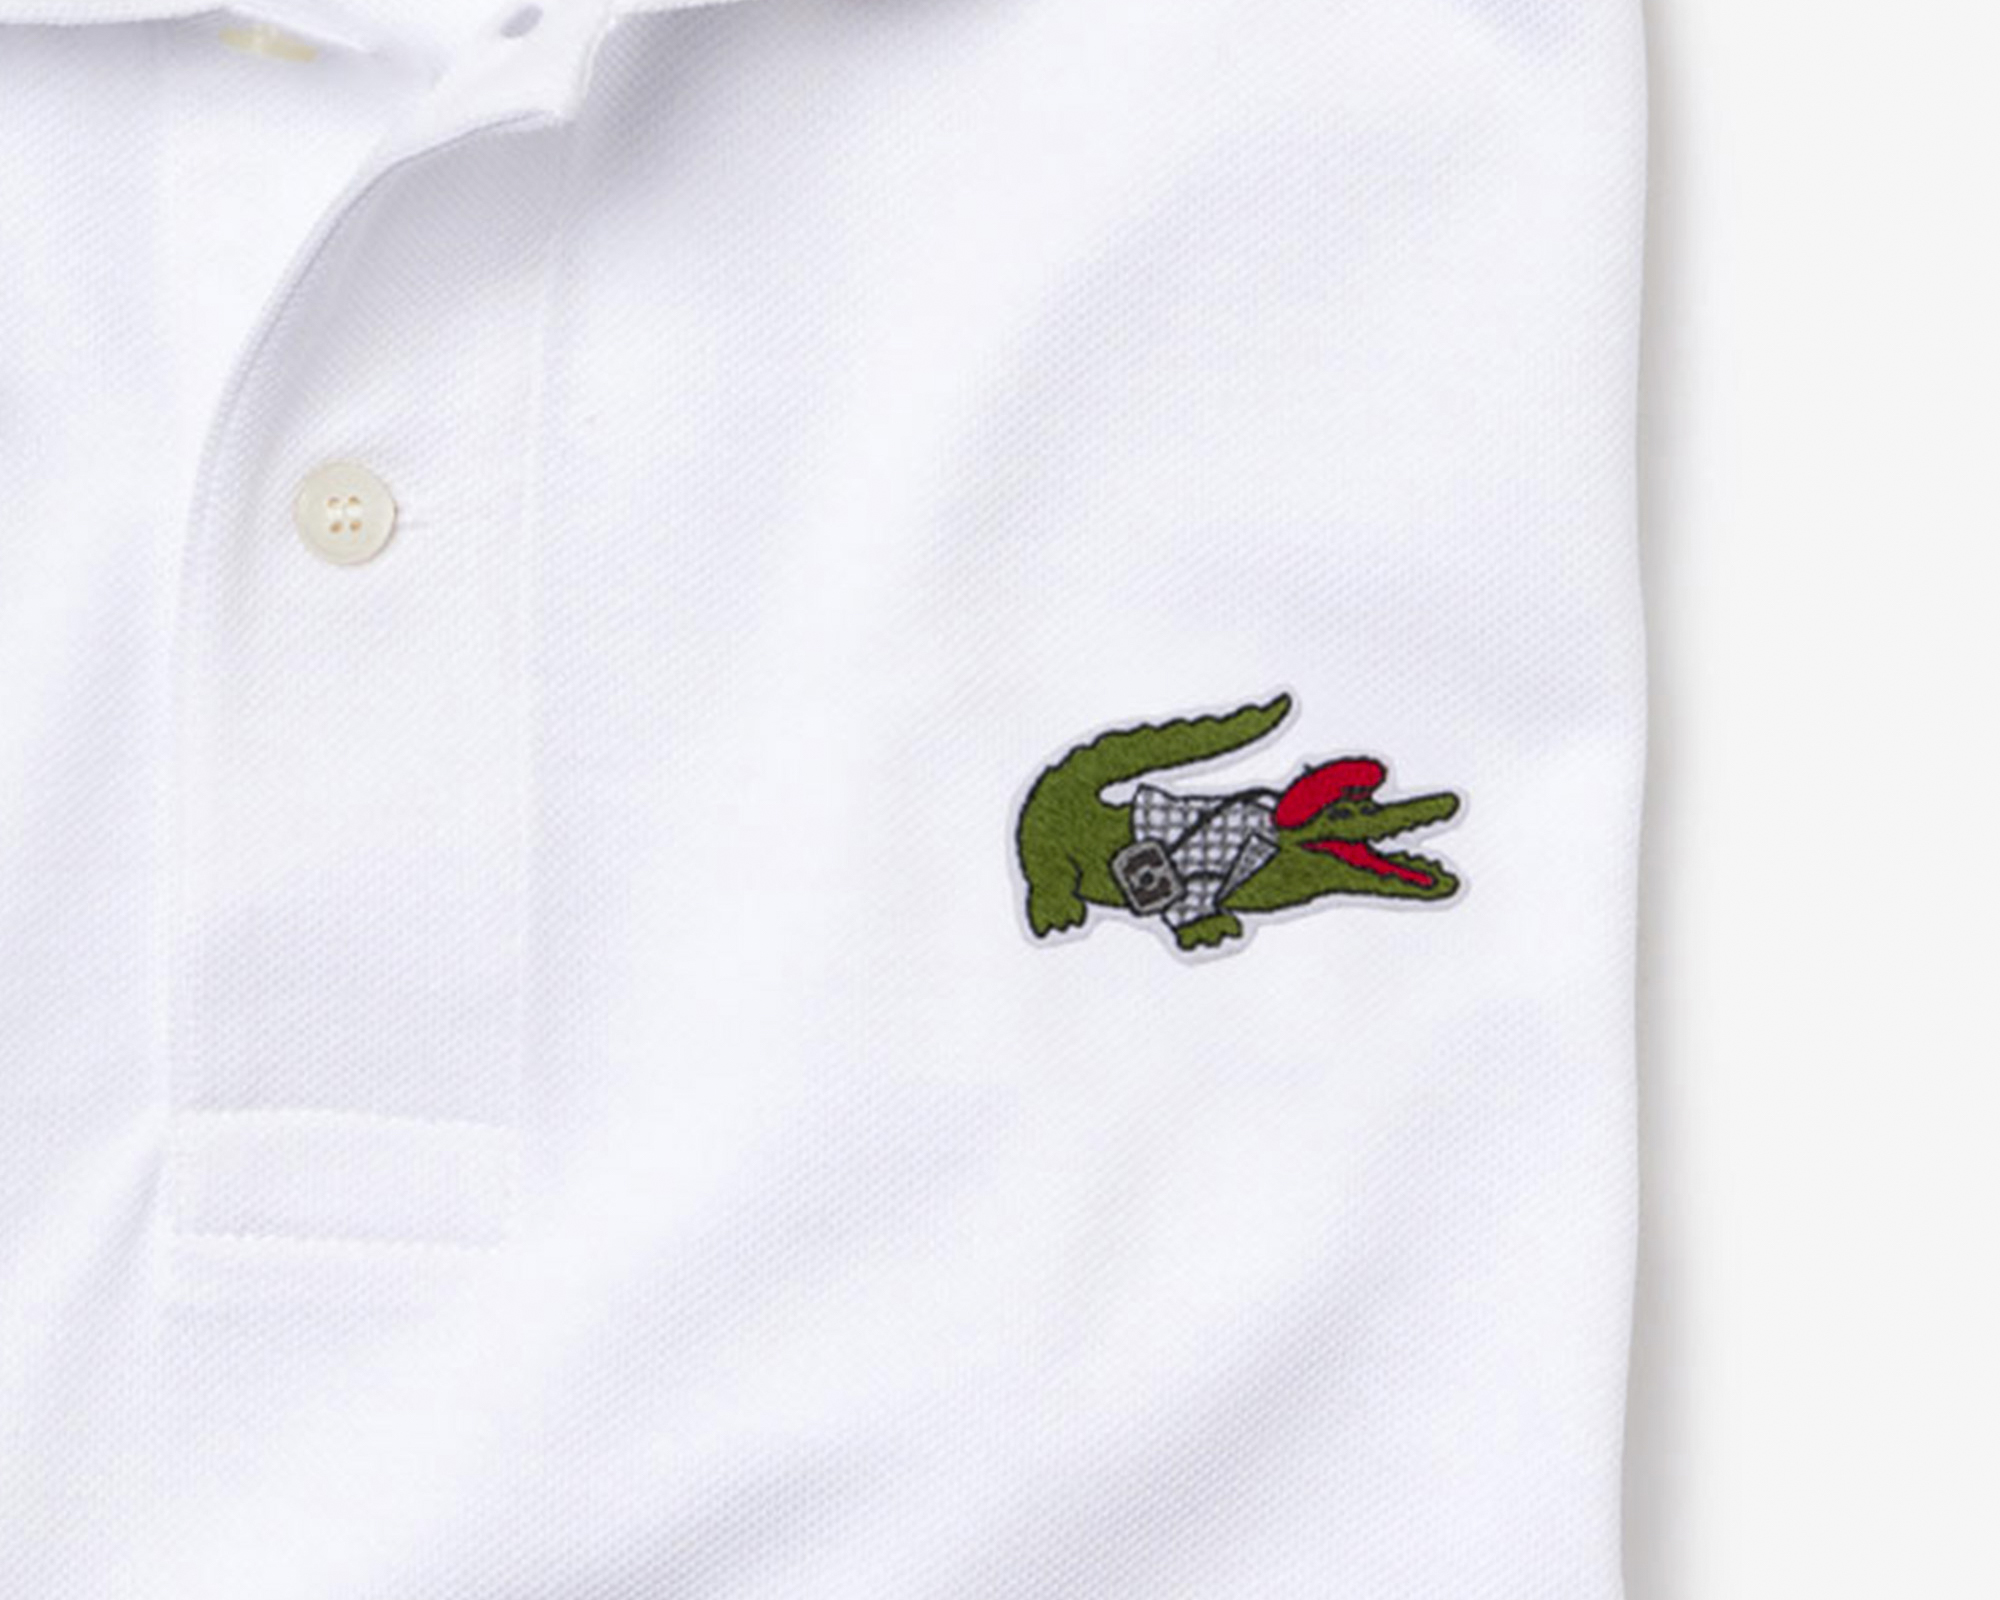 Lacoste on Twitter: "Everything? Then you surely want your limited-edition Emily Paris patch! online and at Lacoste Arena in Paris &amp; Regent Street Store in London. https://t.co/eg7DGk2aQQ" Twitter